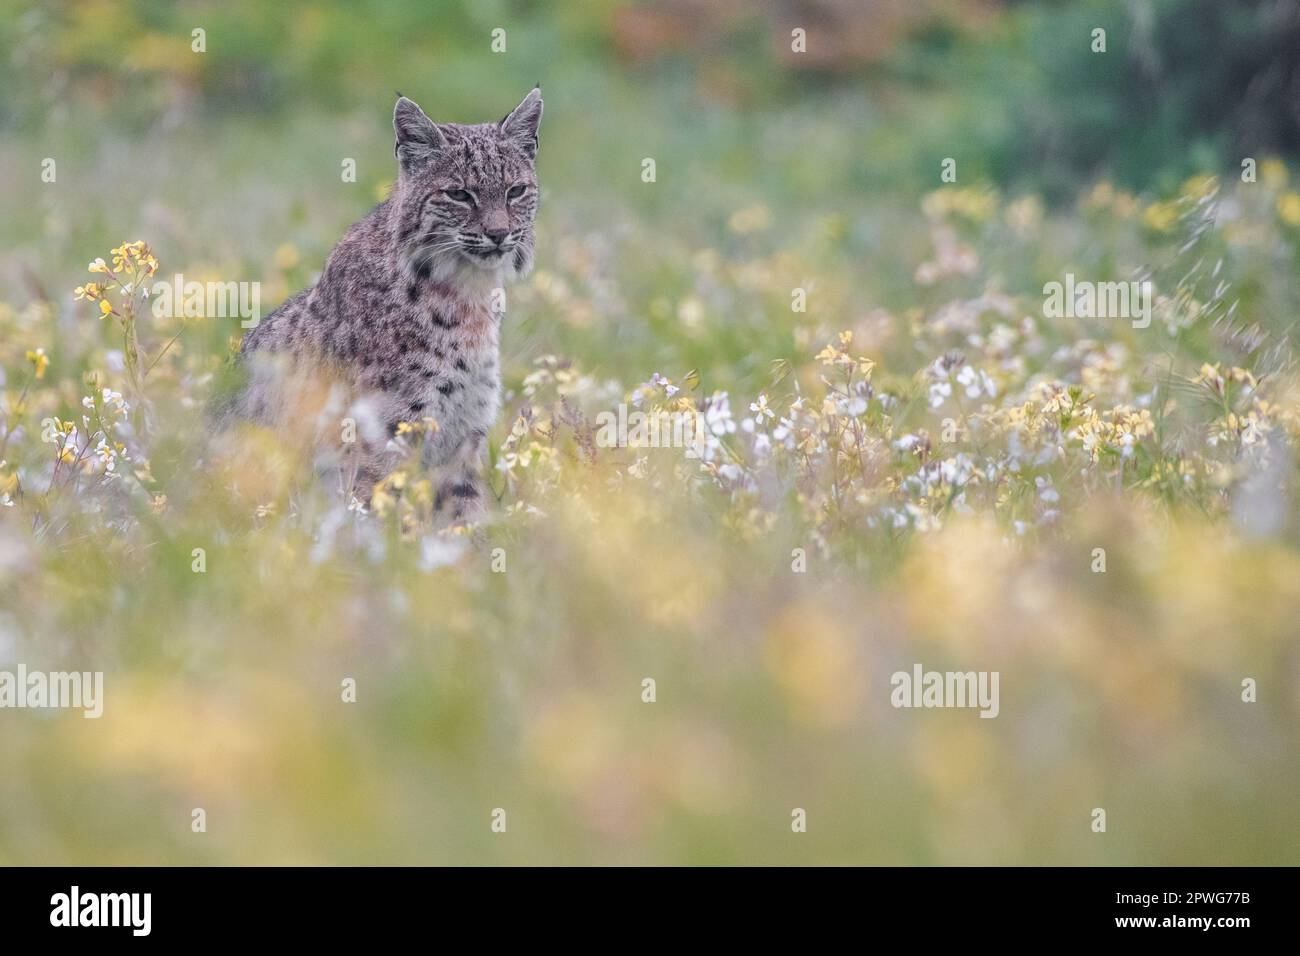 A bobcat, Lynx rufus, stands in a field of blooming flowers, possibly wild radish, Raphanus sativus, an introduced species to California. Stock Photo